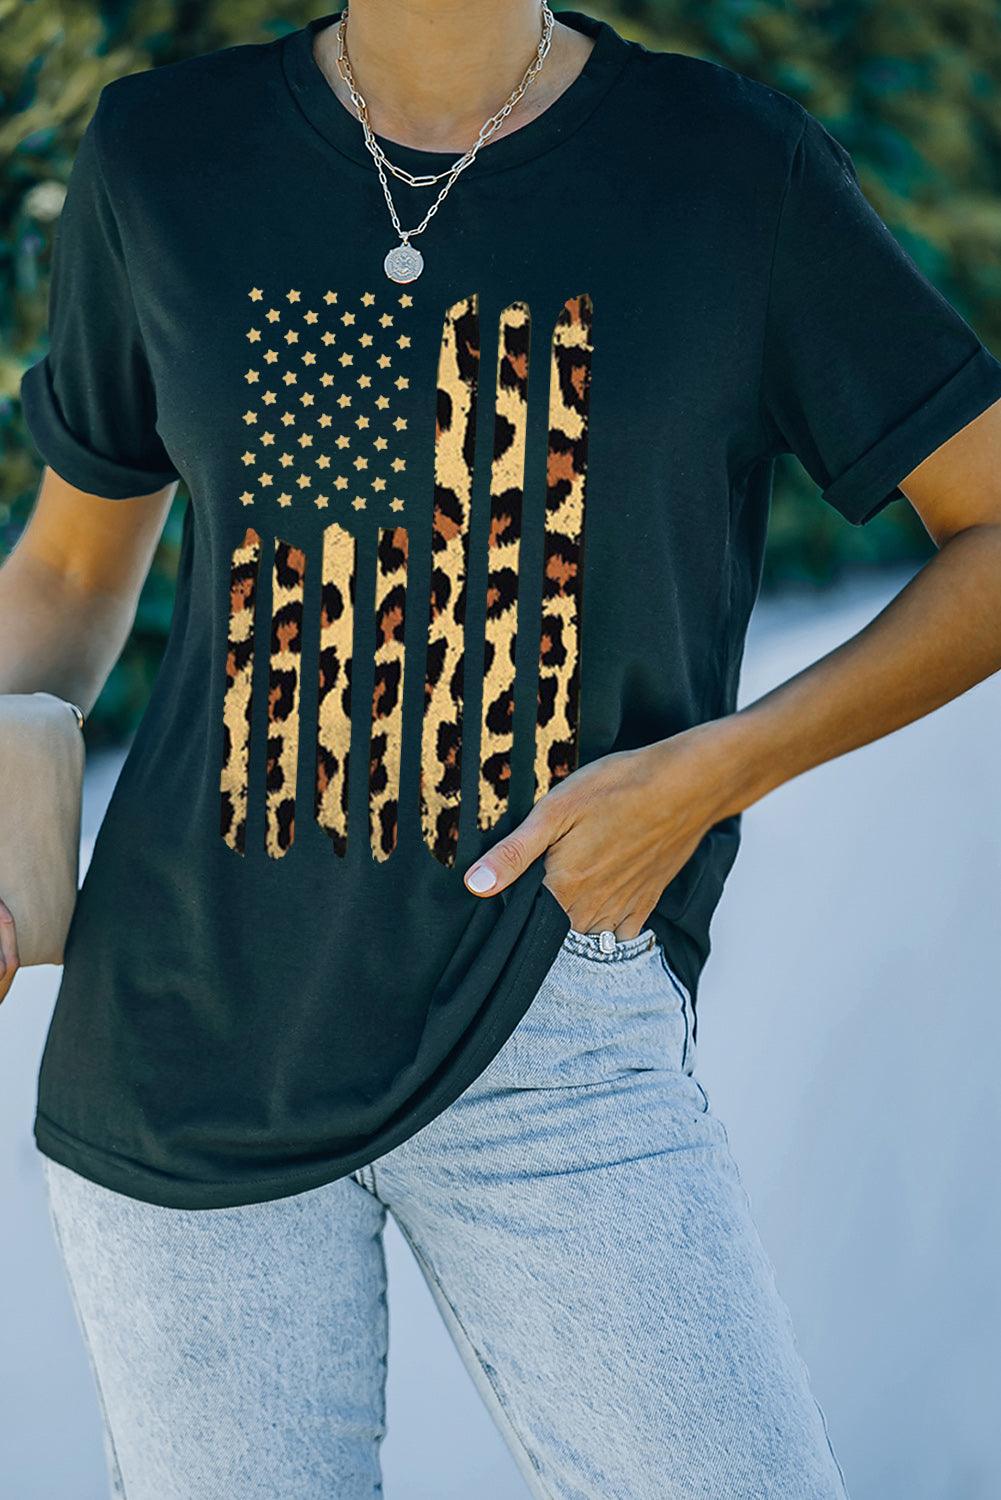 Stars and Stripes Graphic Round Neck Tee - Lab Fashion, Home & Health